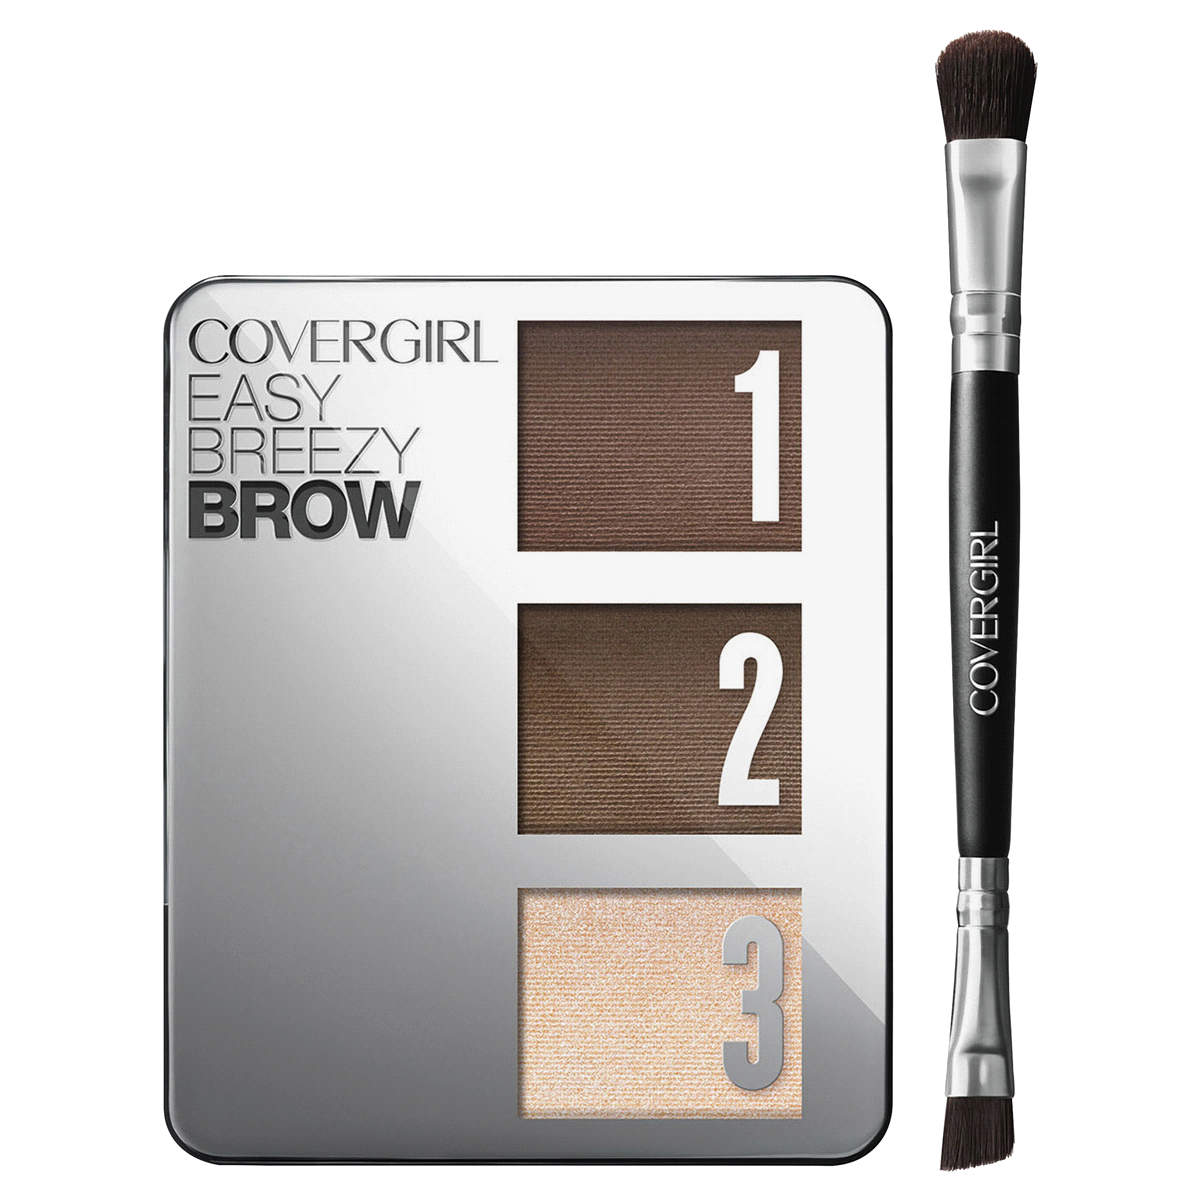 slide 7 of 7, Covergirl Easy Breezy Brow Powder Kit, Rich Brown, 1 ct